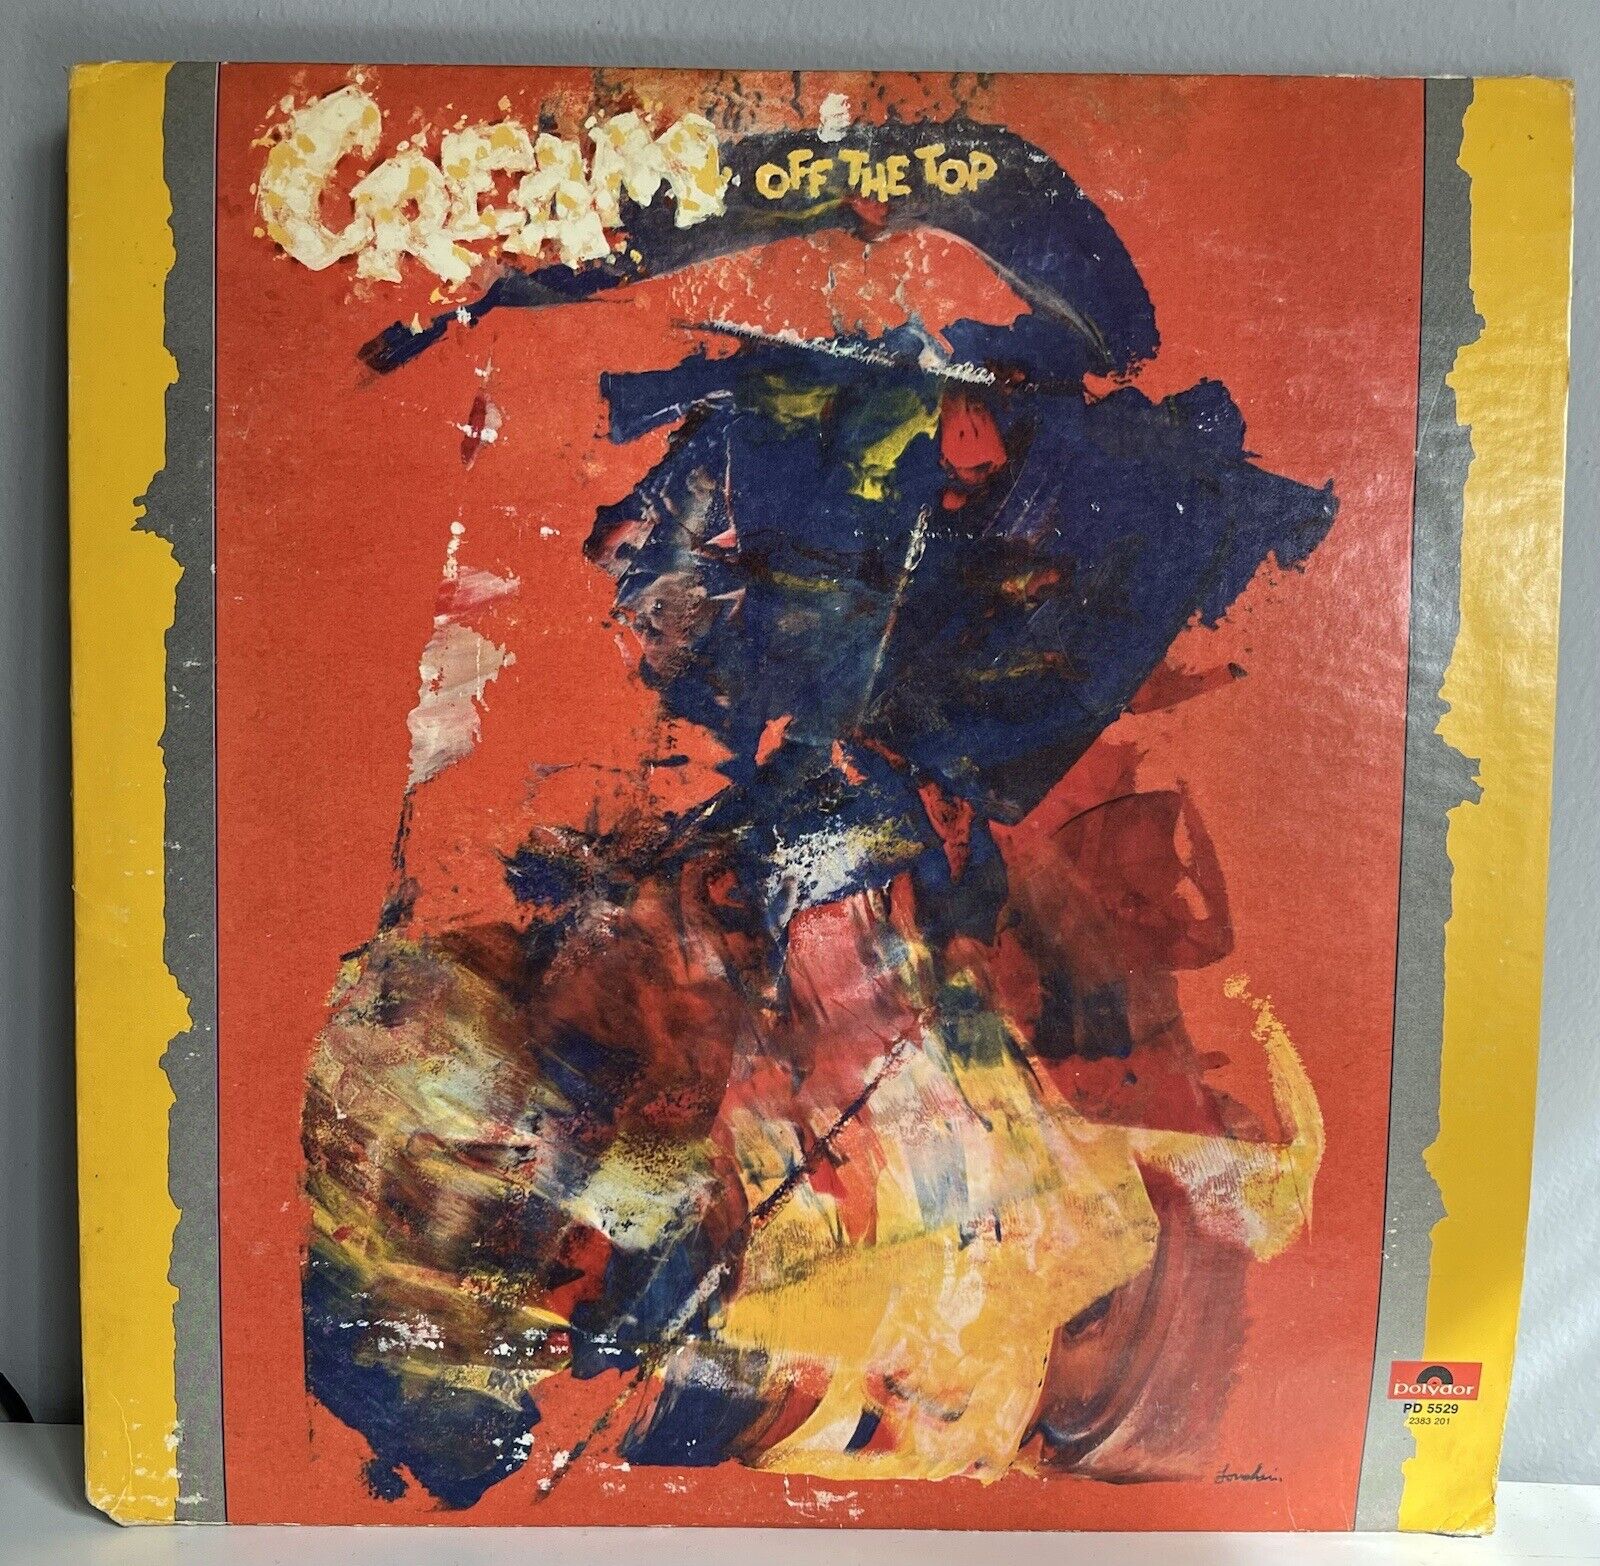 Eric Clapton’s “Cream Off The Top” Amazing Compilation Of Cream VG+ Clean Copy